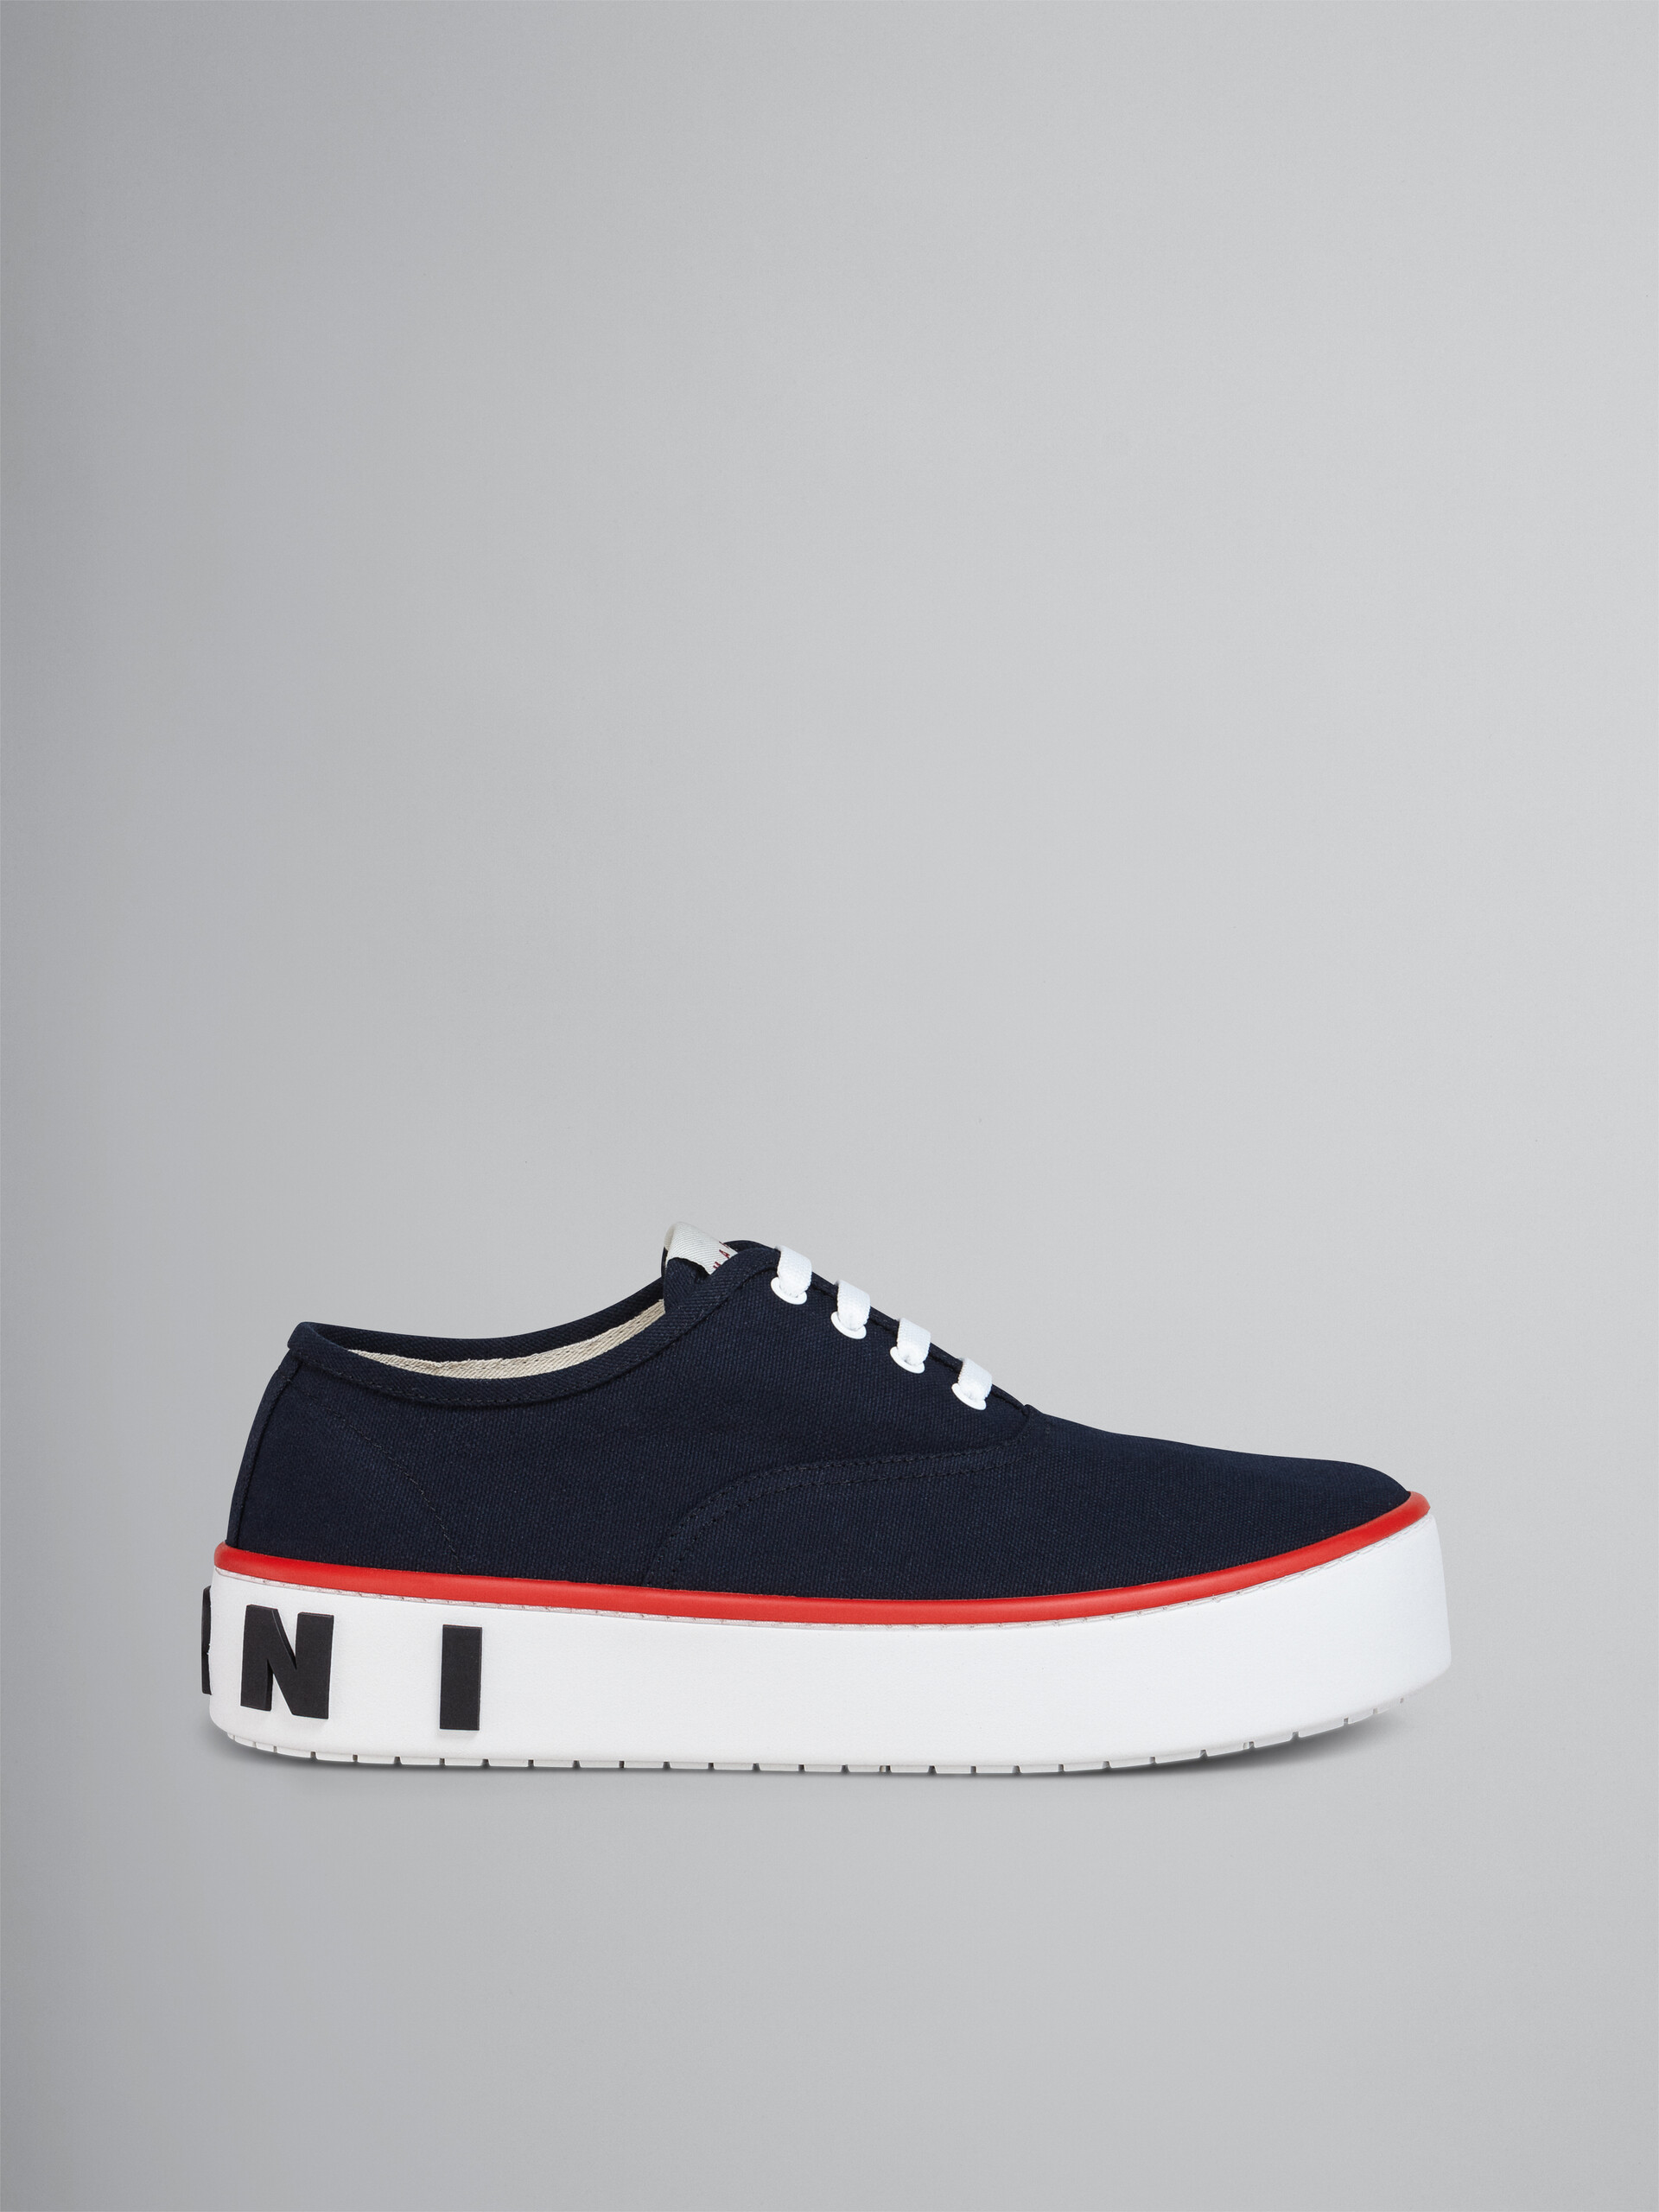 Blue canvas sneaker with maxi logo - Sneakers - Image 1